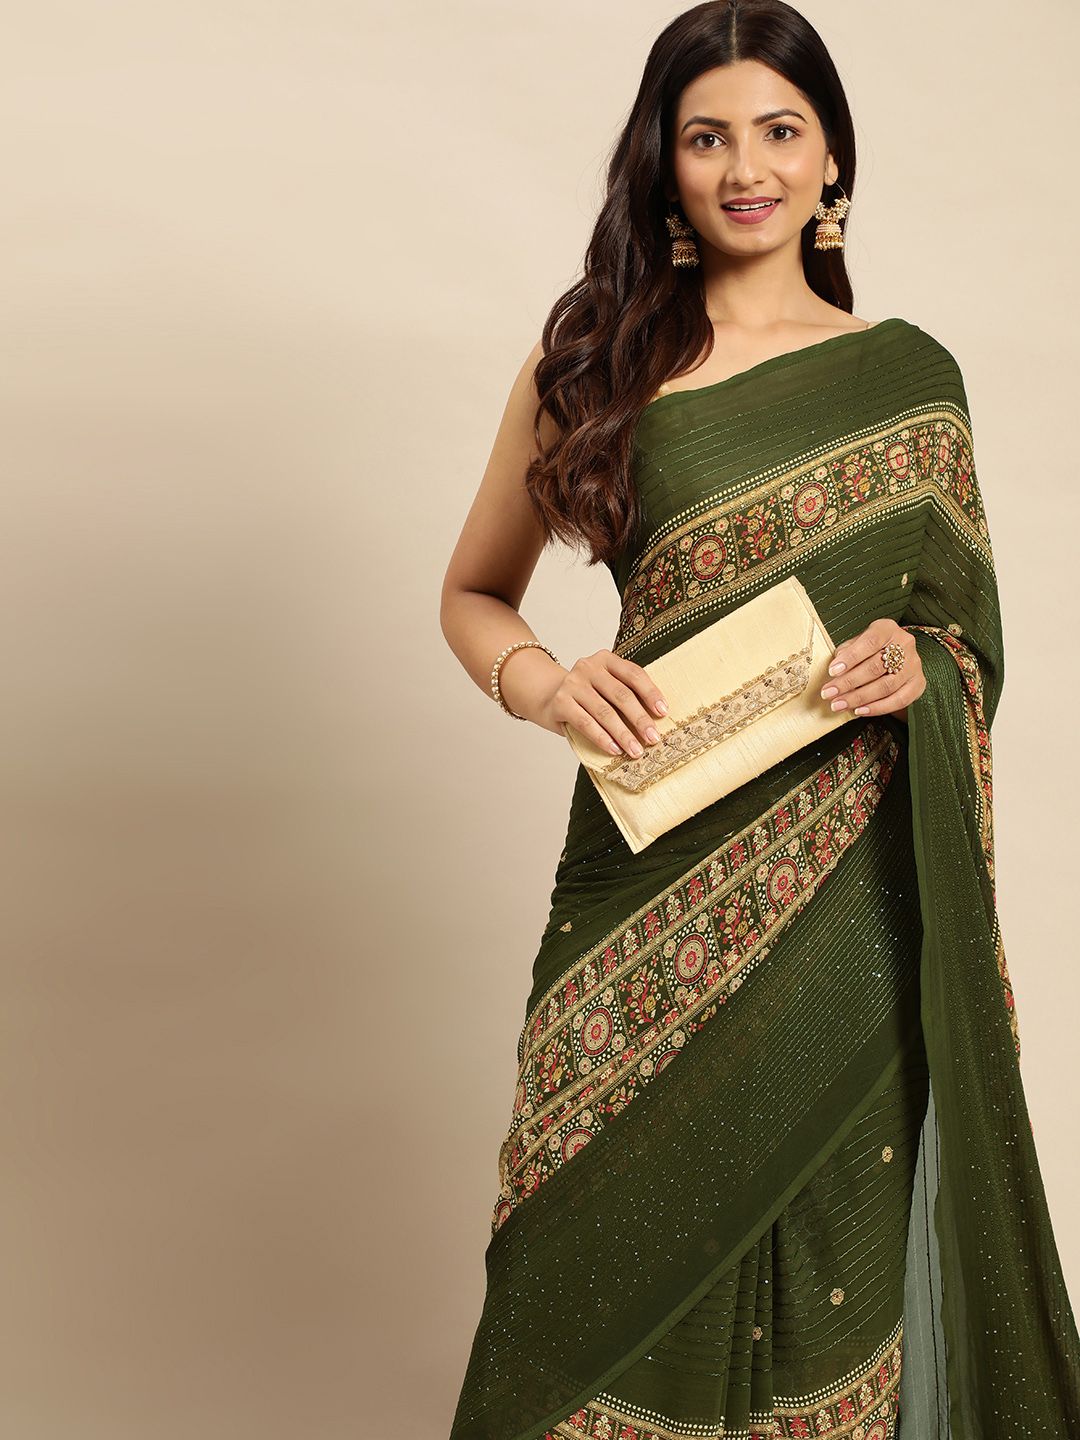 kasee Embellished Ethnic Motifs Sequinned Satin Saree Price in India